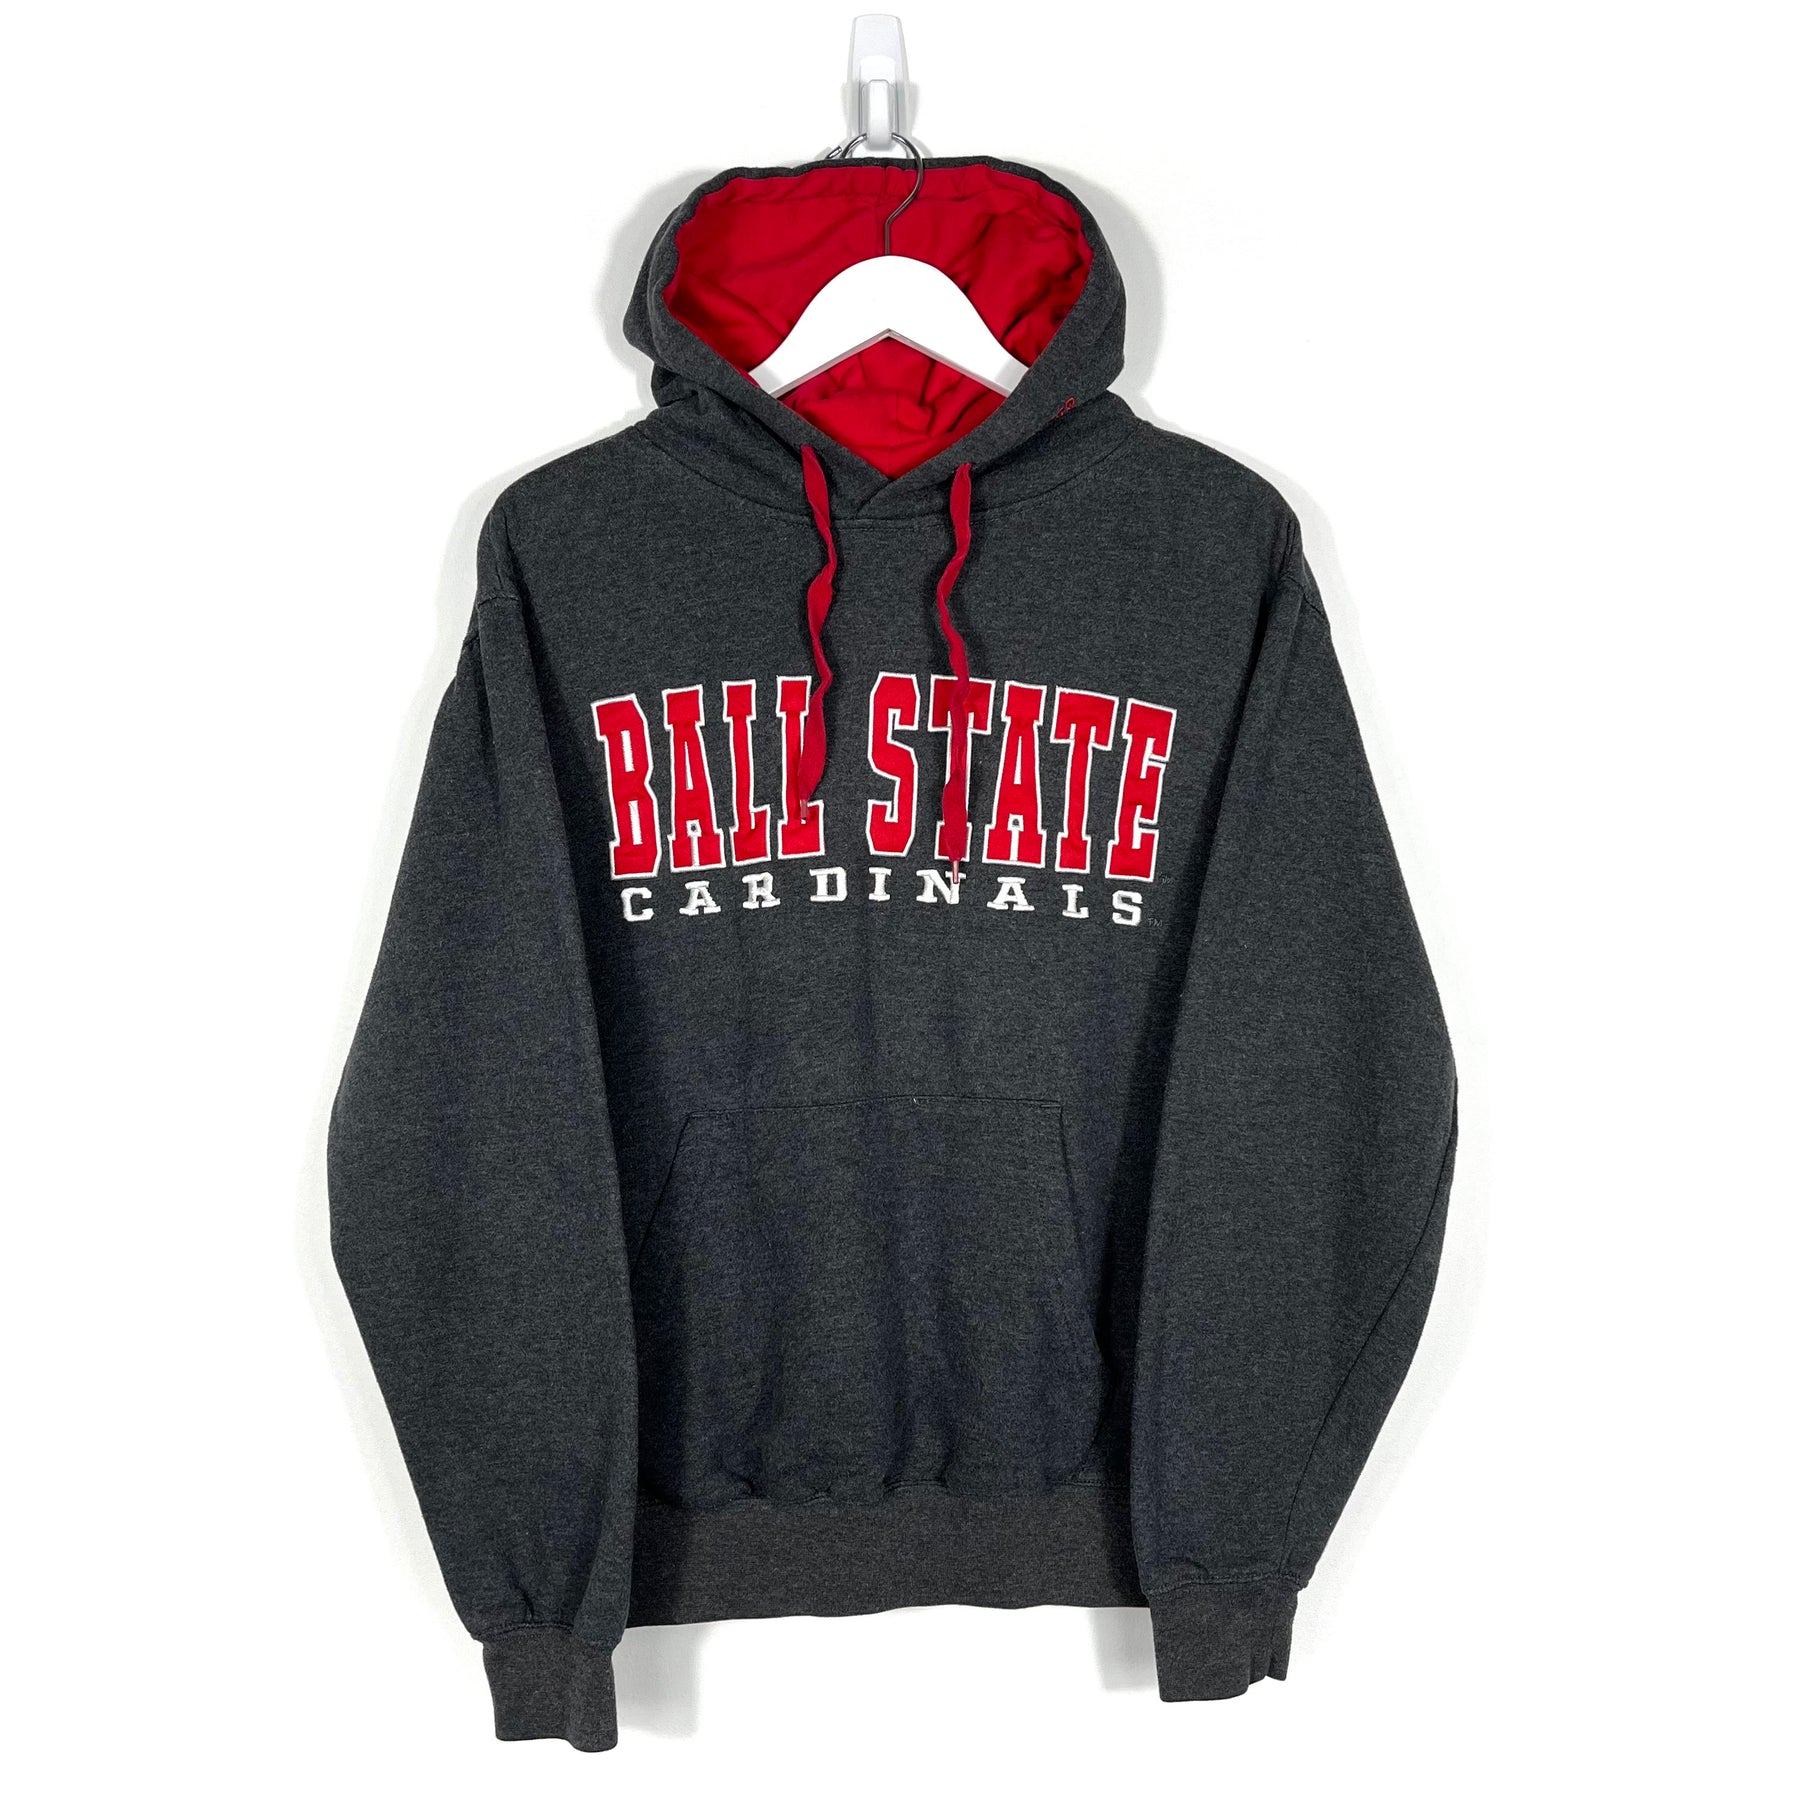 Champion Ball State Cardinals Hoodie - Men's Small